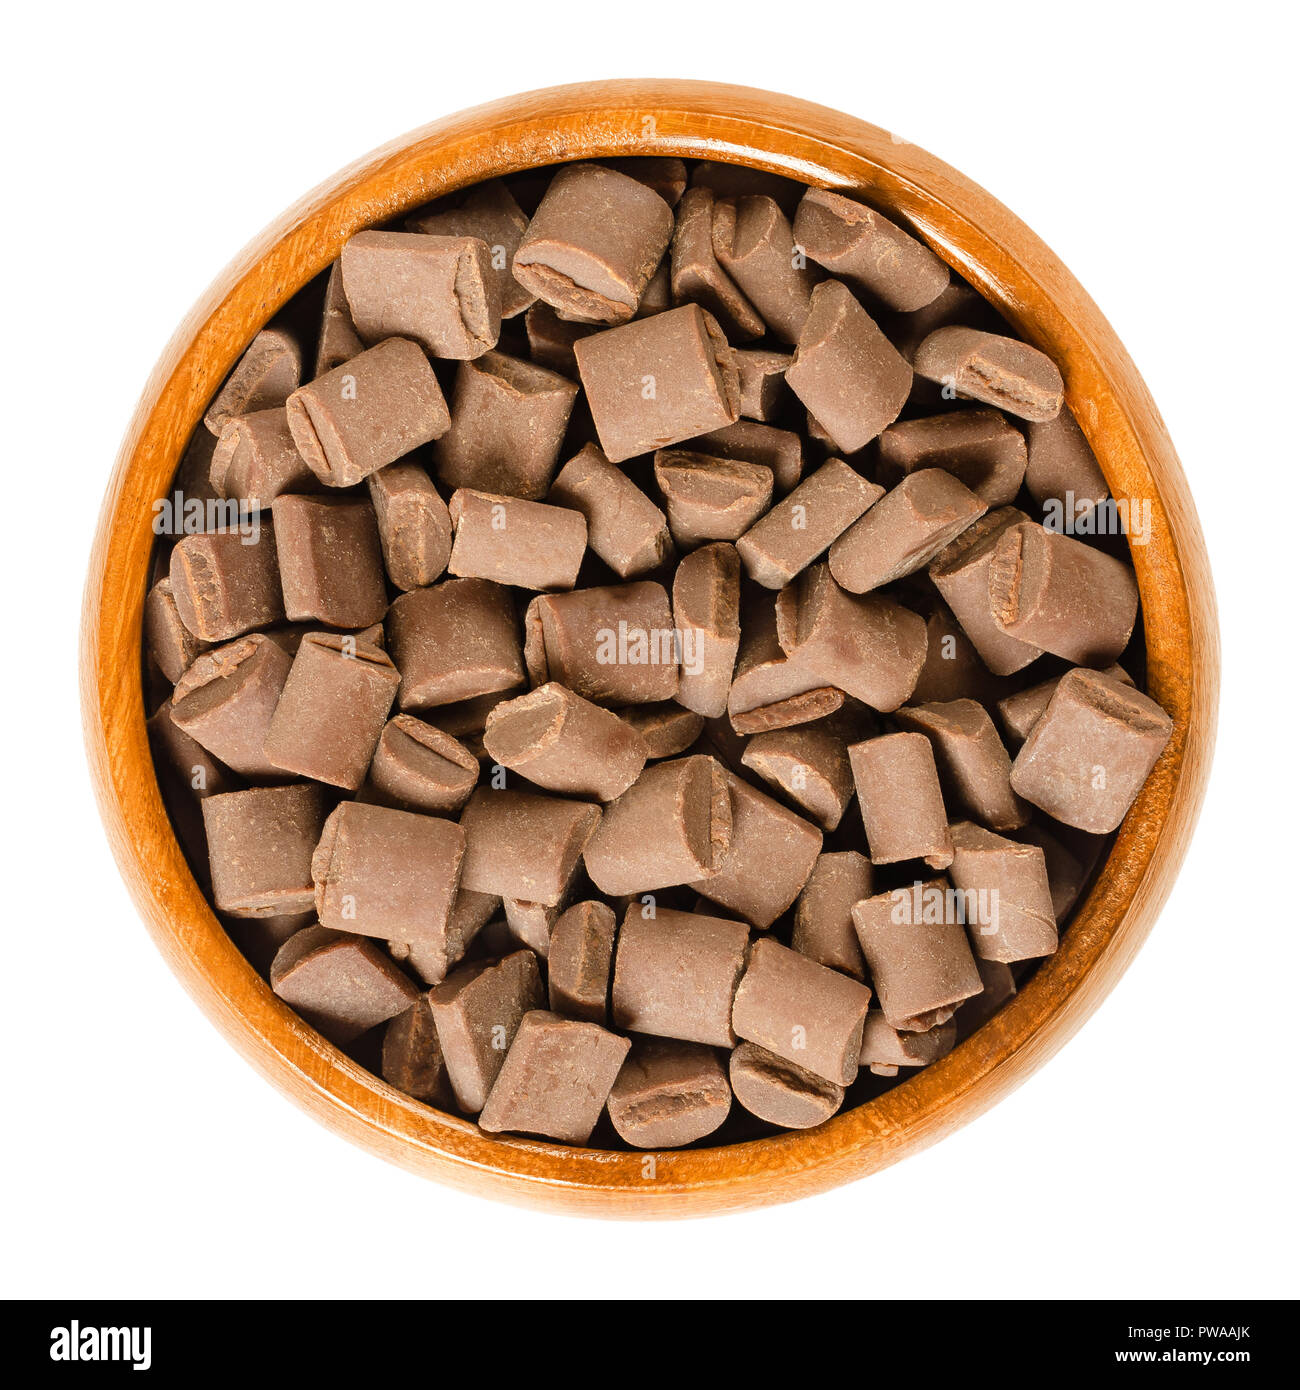 Chocolate chunks in wooden bowl. Milk chocolate pieces for baking and decorating of cookies, muffins and brownies. Edible baking igredient. Stock Photo